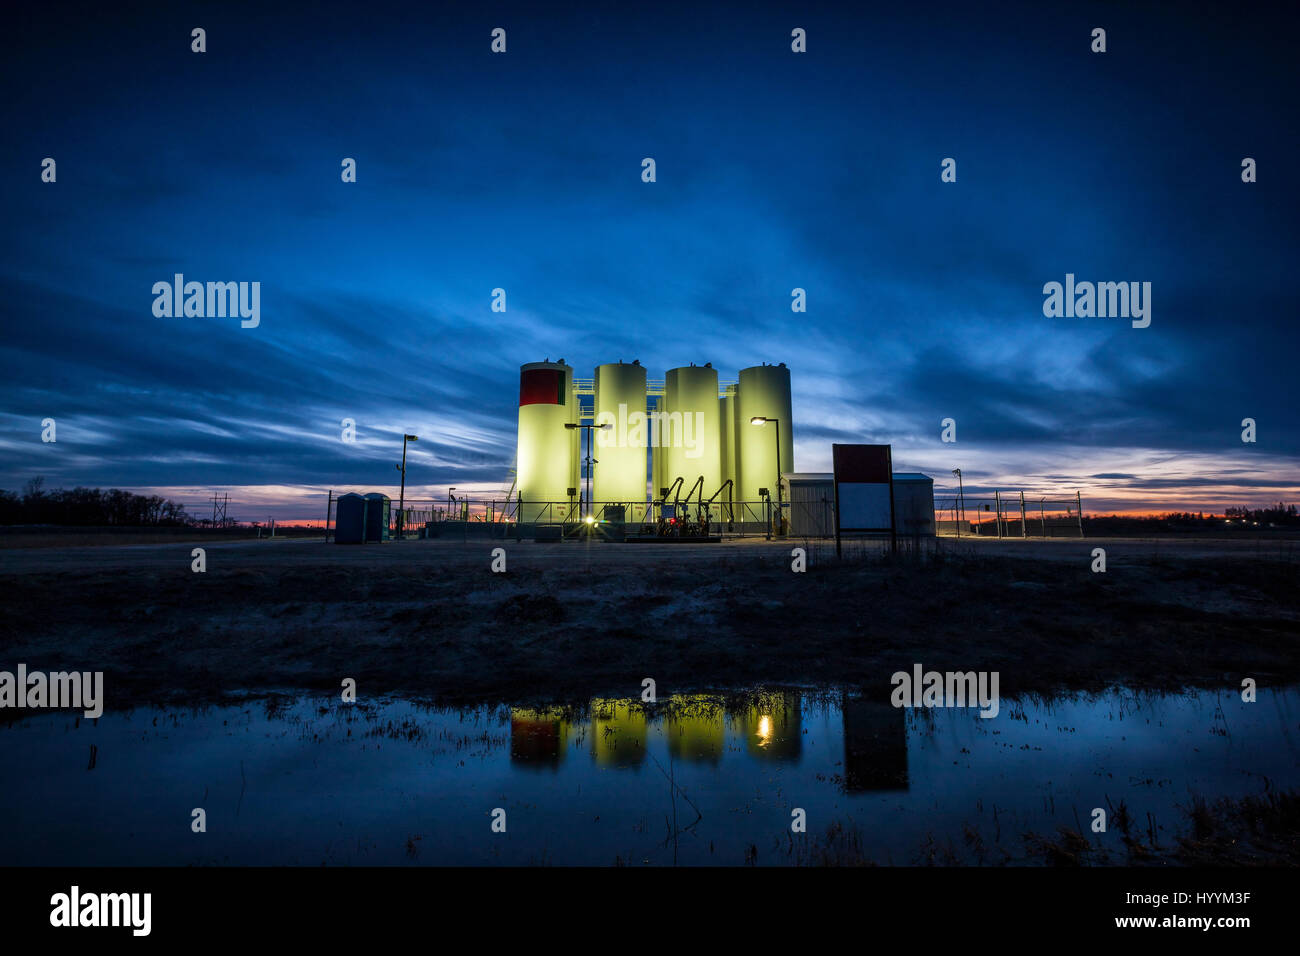 Gas containers at night in Canada Stock Photo